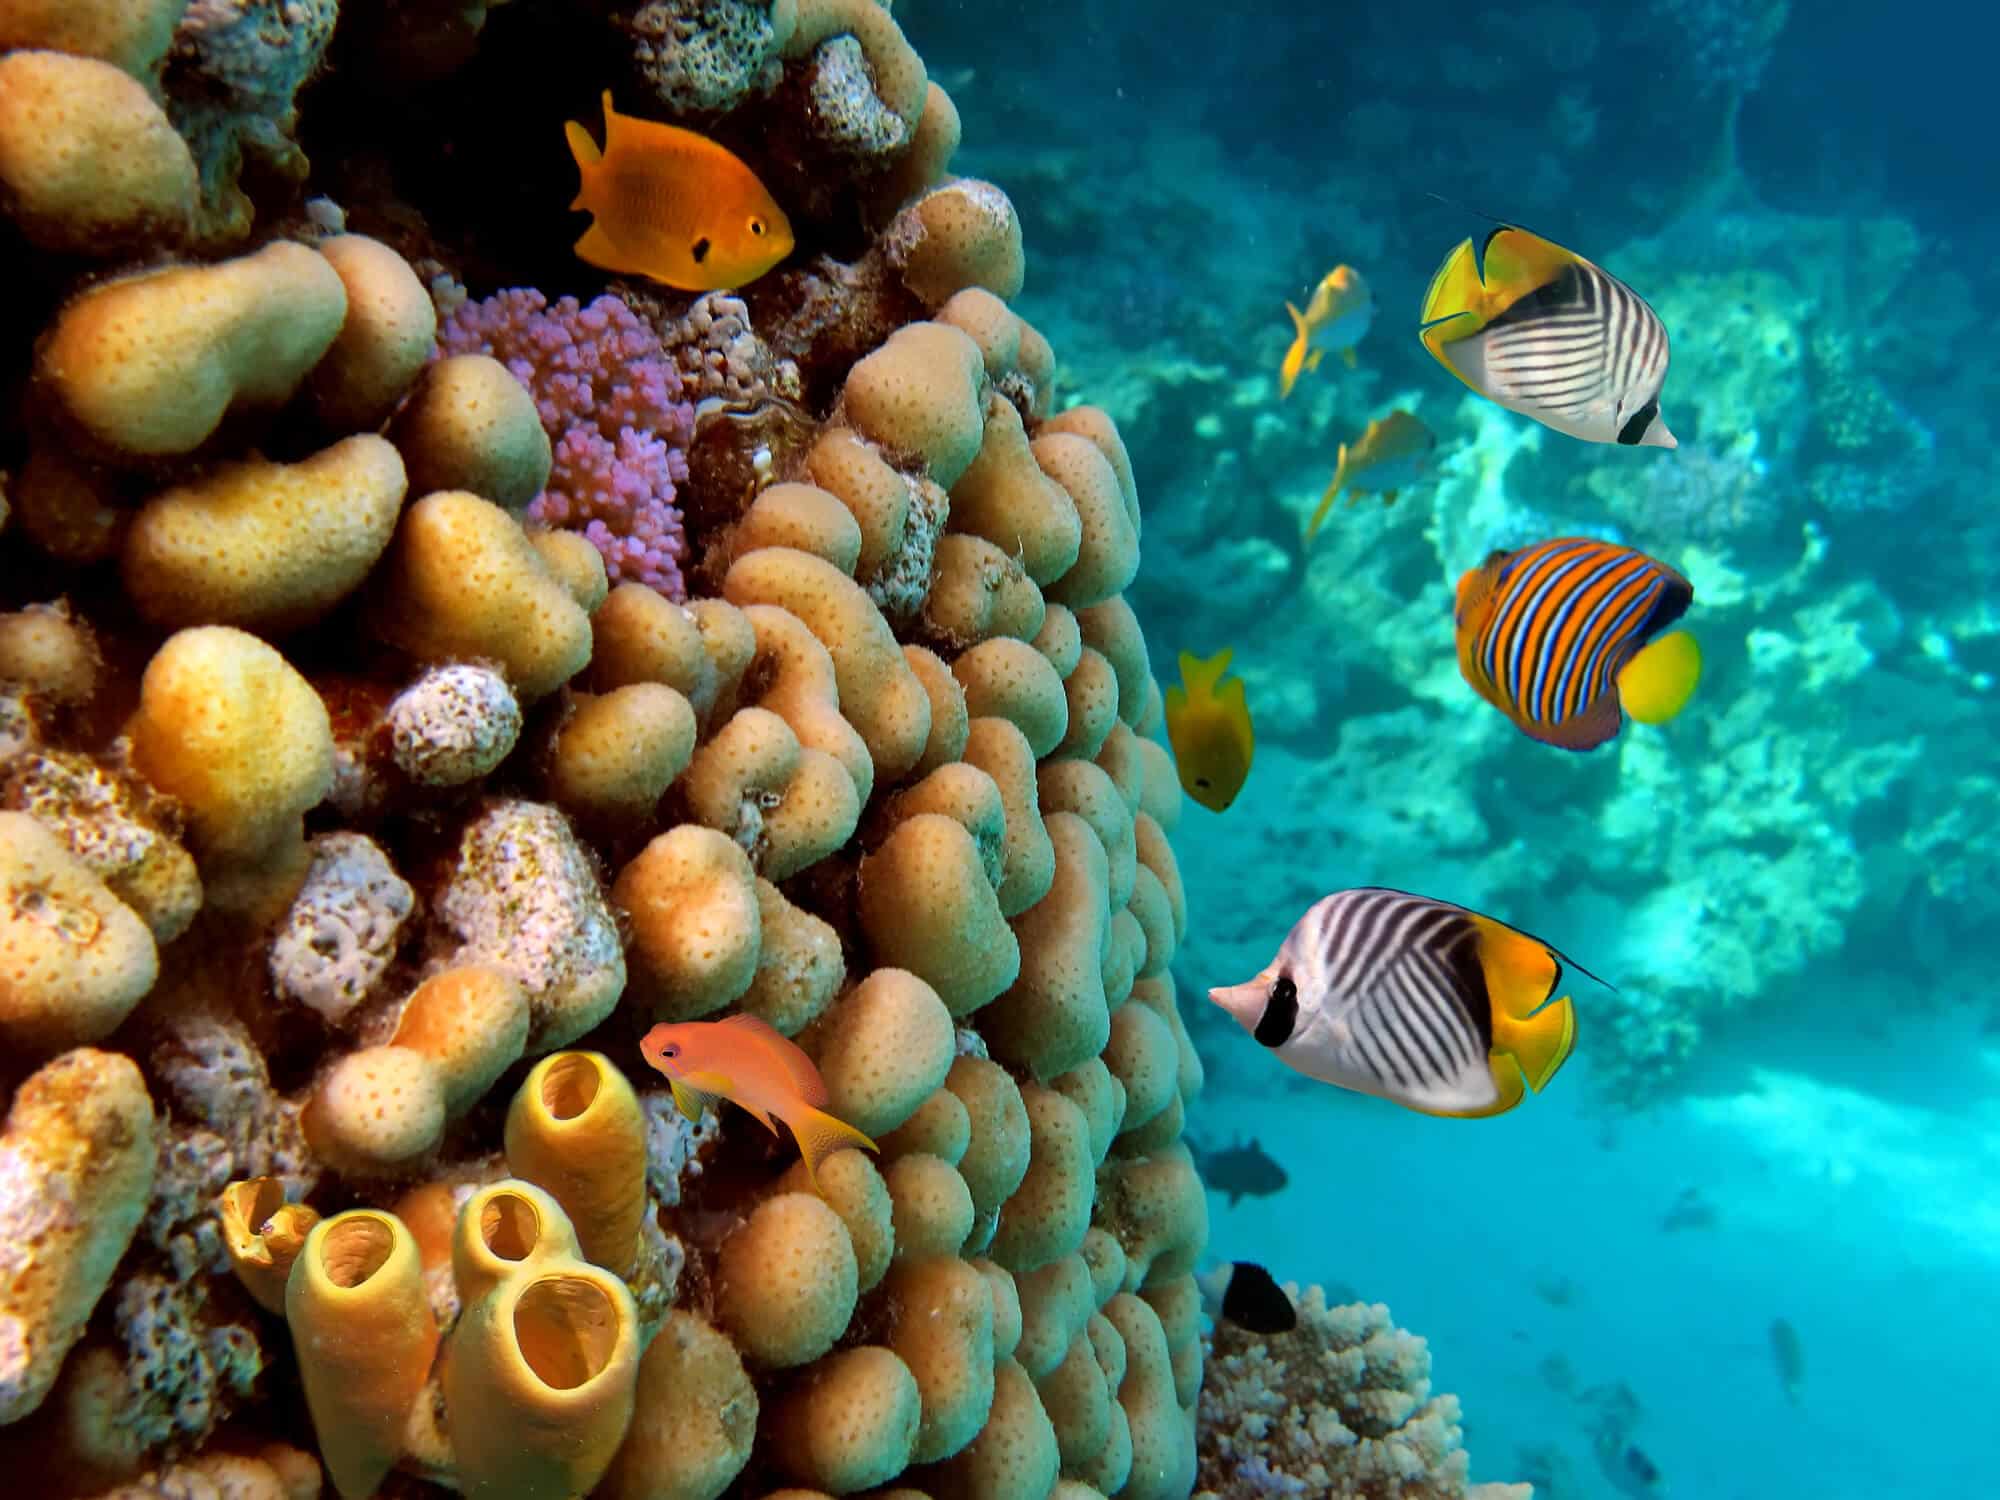 Coral reef in the Red Sea. Photo: depositphotos.com